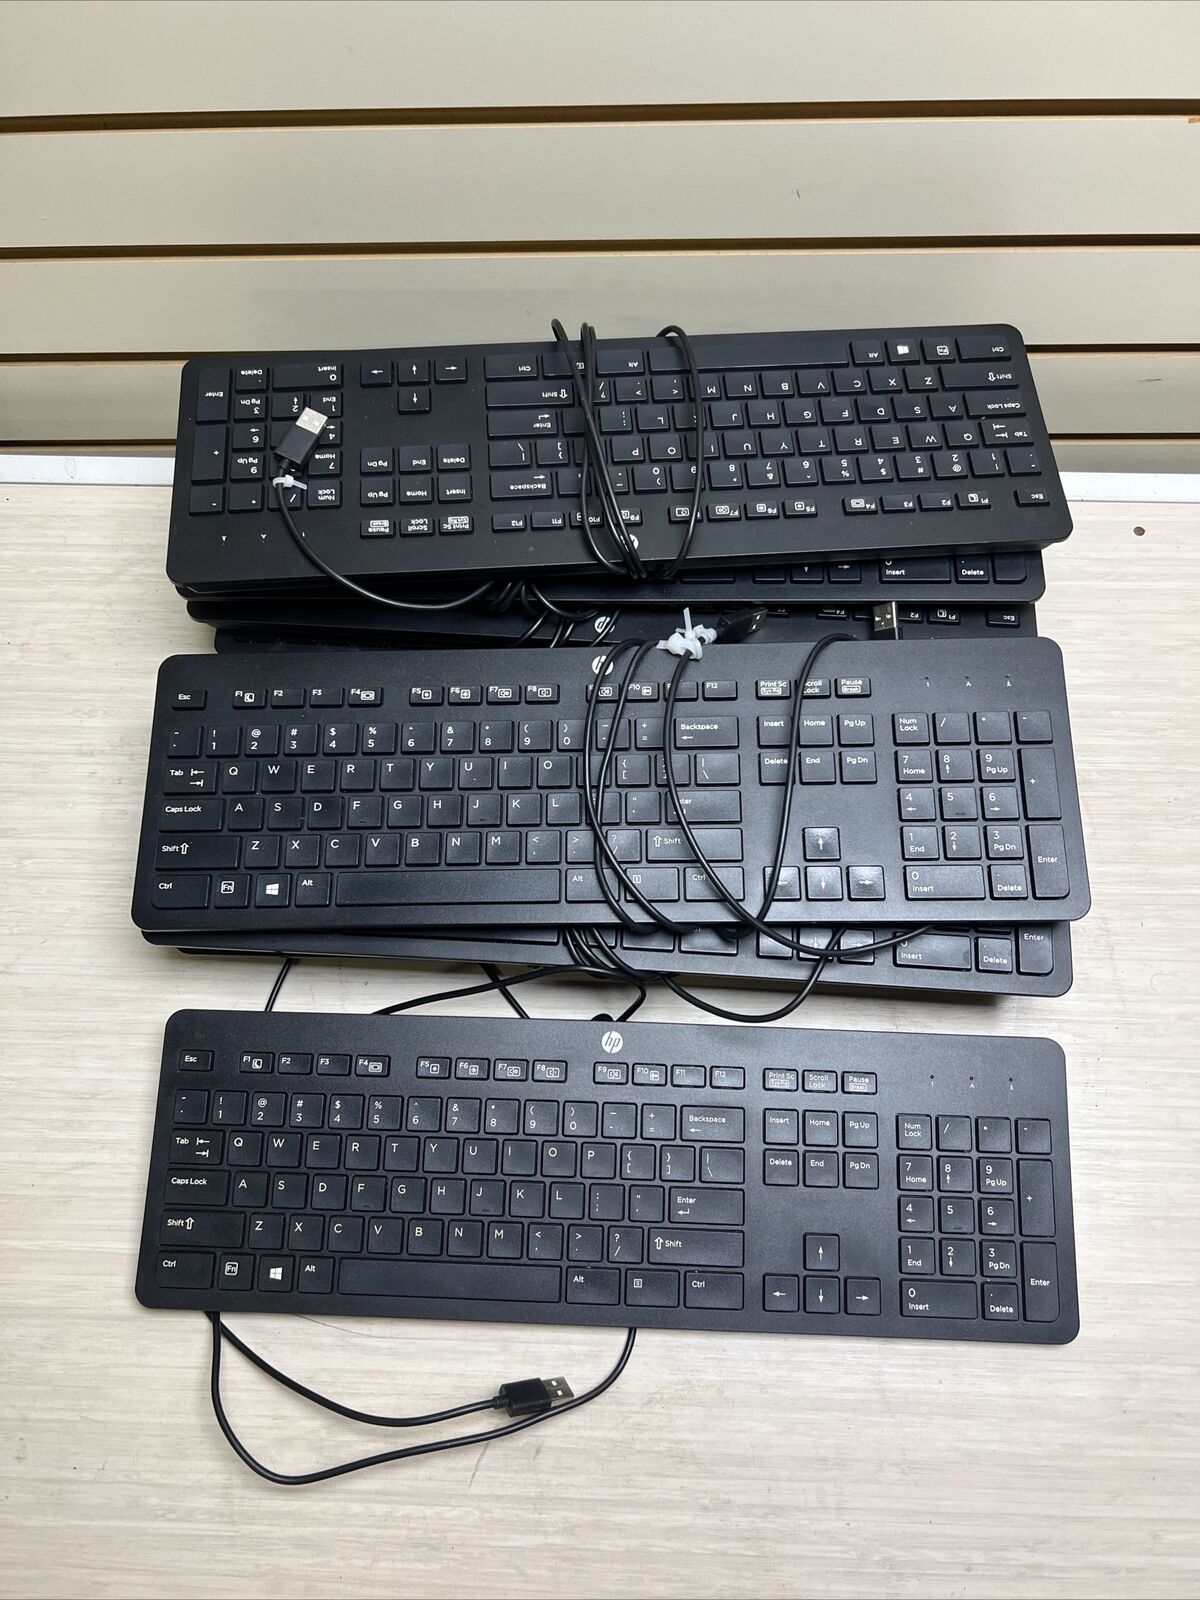 LOT OF 10 - HP 803181-001 Wired USB Slim Keyboard (US) VERY NICE CONDITION